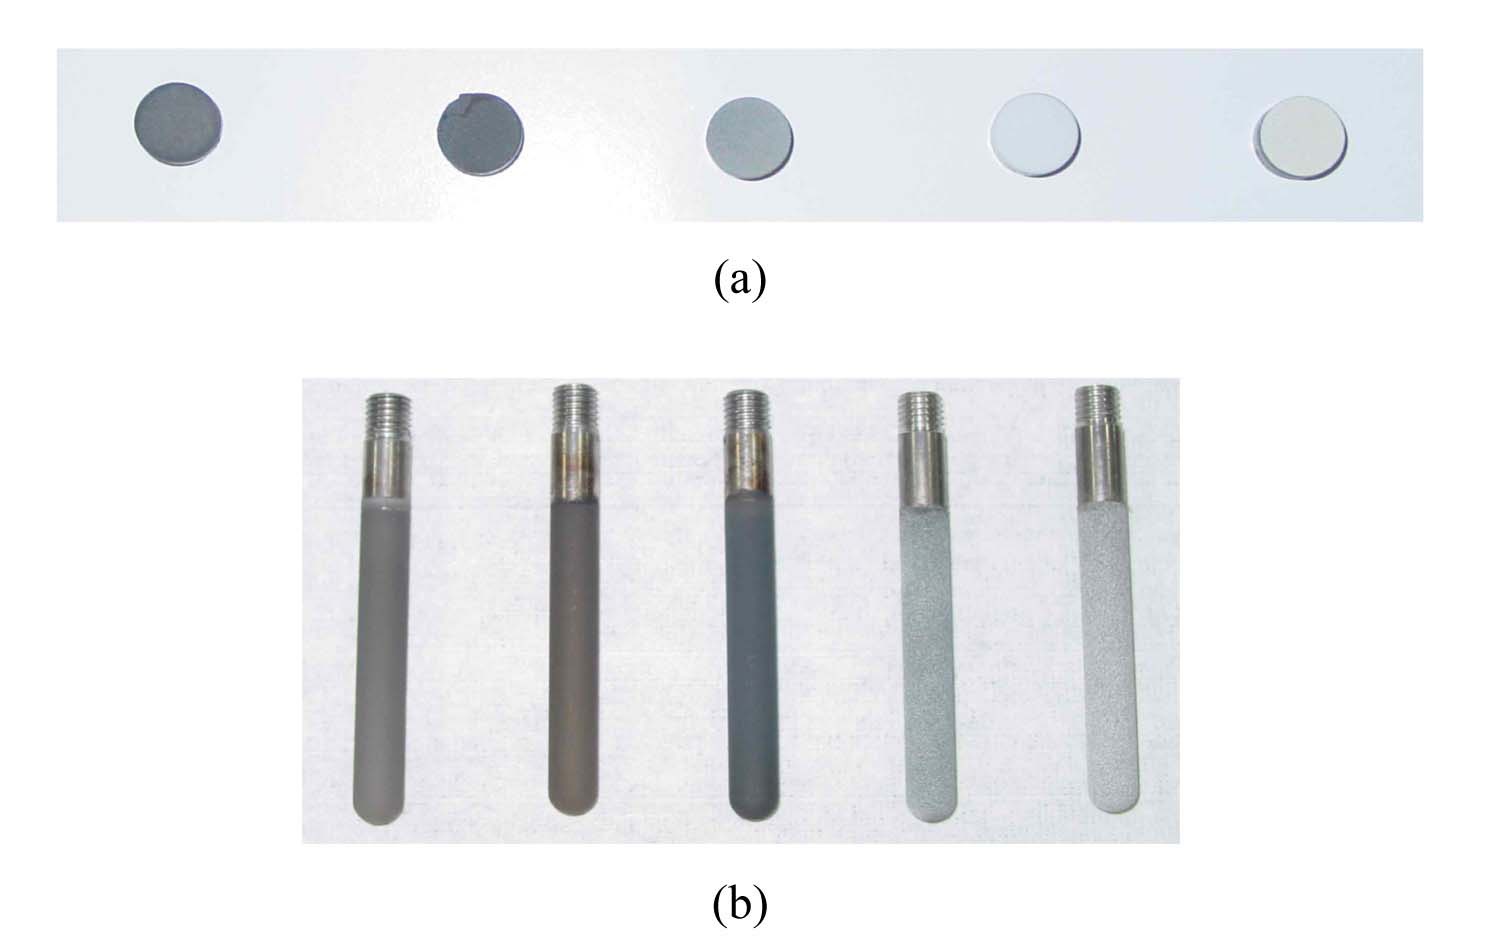 Coated Discs for Thermal Cycling Test (a) and Coated Niobium Rods for Melt Dipping Test (b): TaC, TiC, ZrC, ZrO2, and Y2O3 from Left to Right